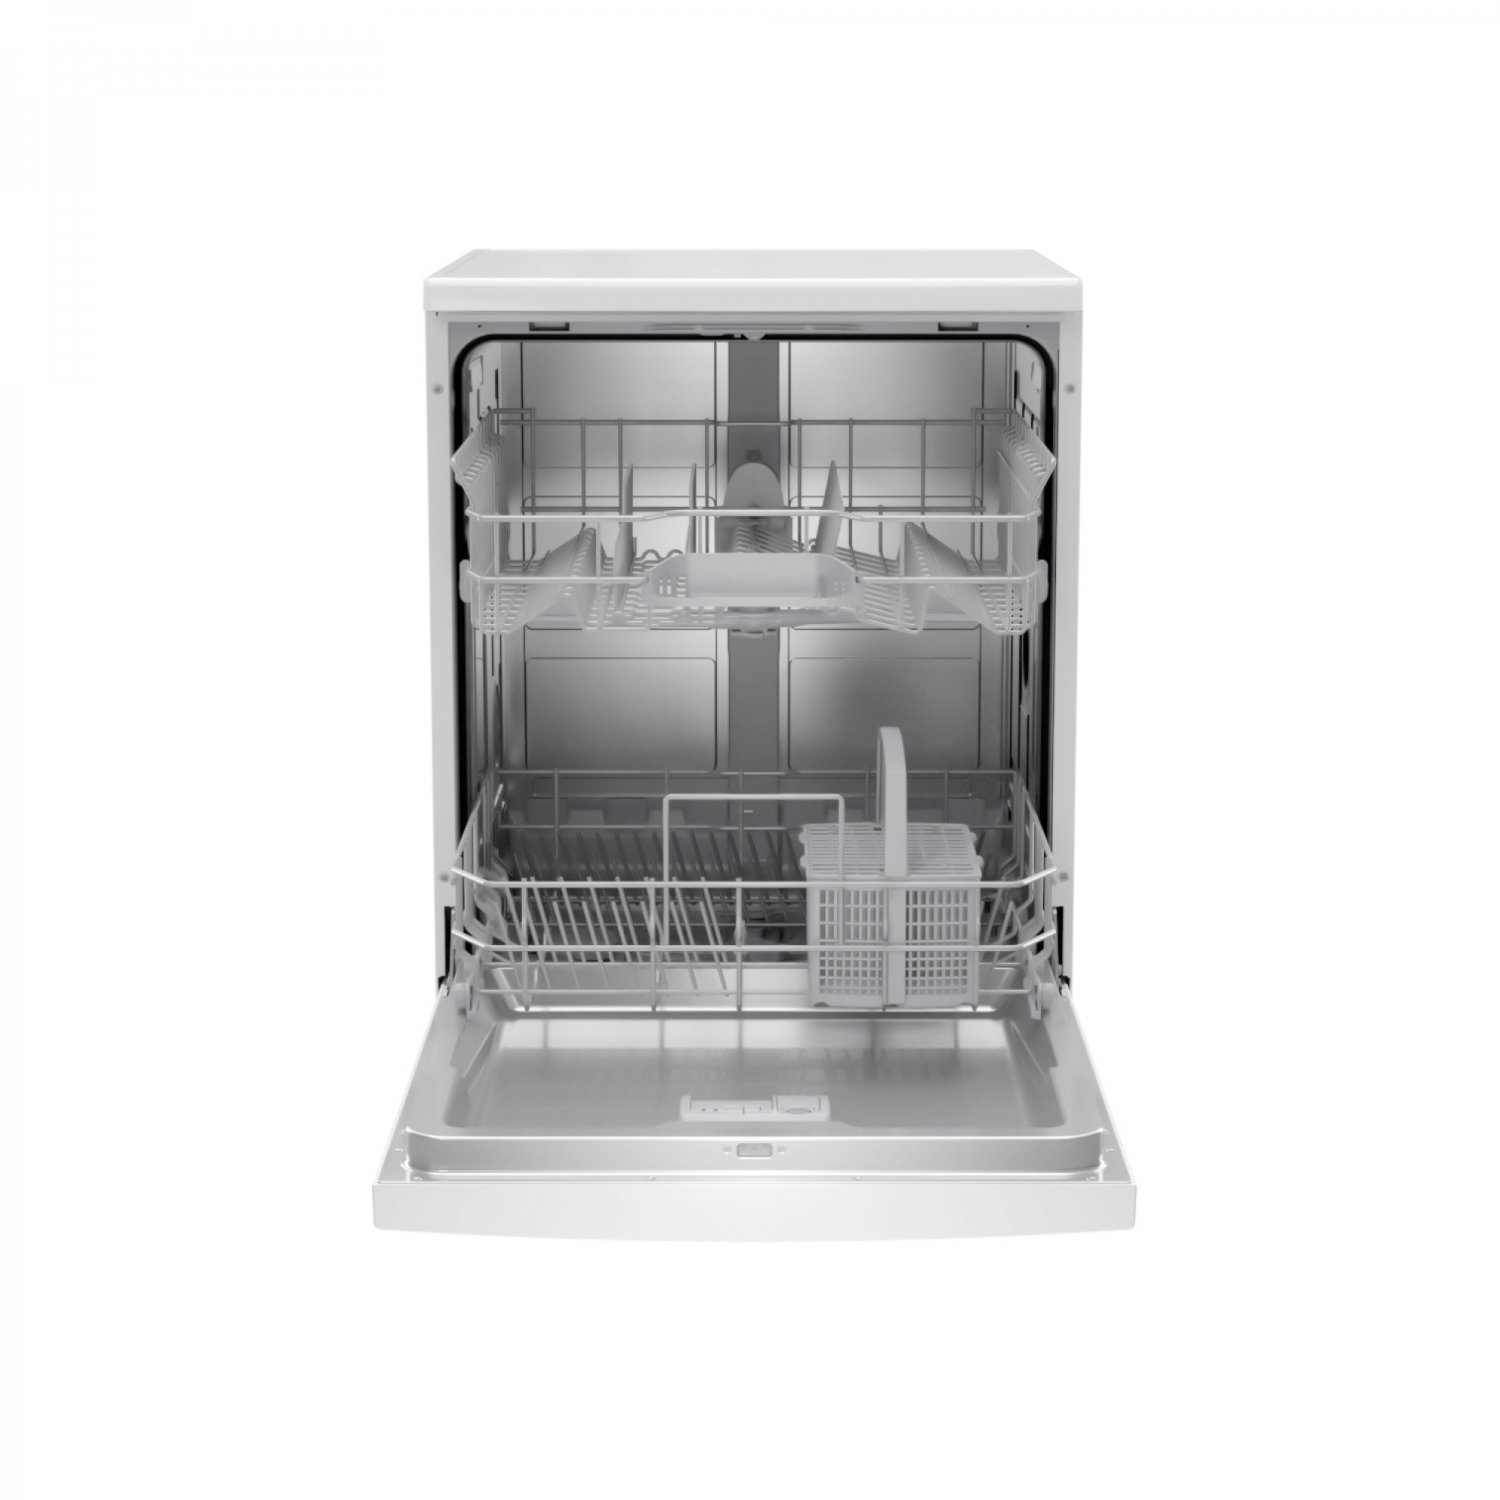 Bosch SGS2ITW08G Full Size Dishwasher - White - 12 Place Settings - 4